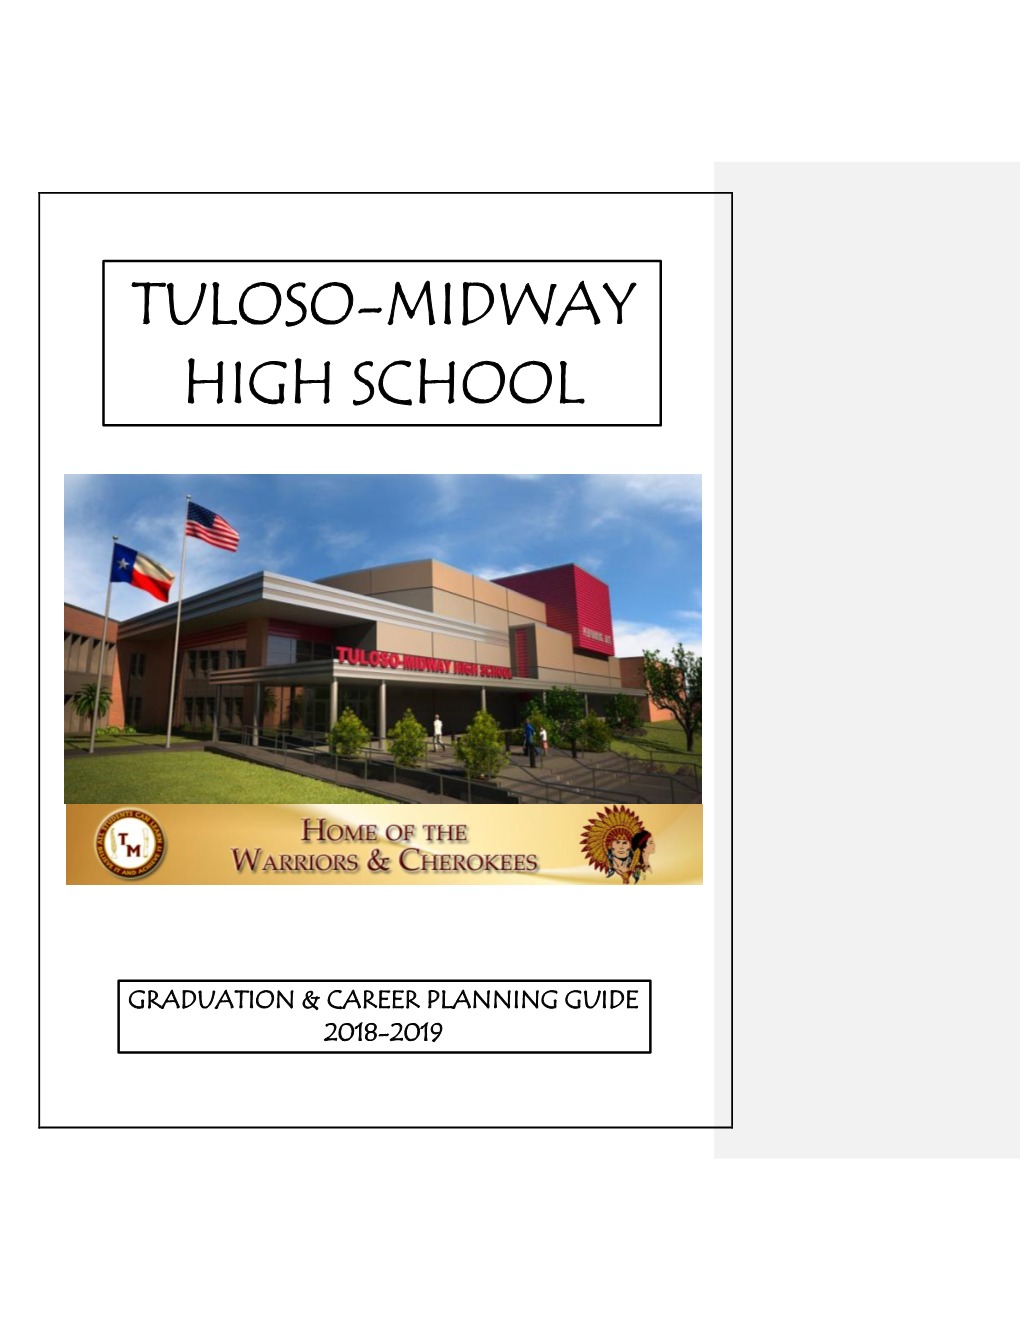 Tuloso-Midway High School